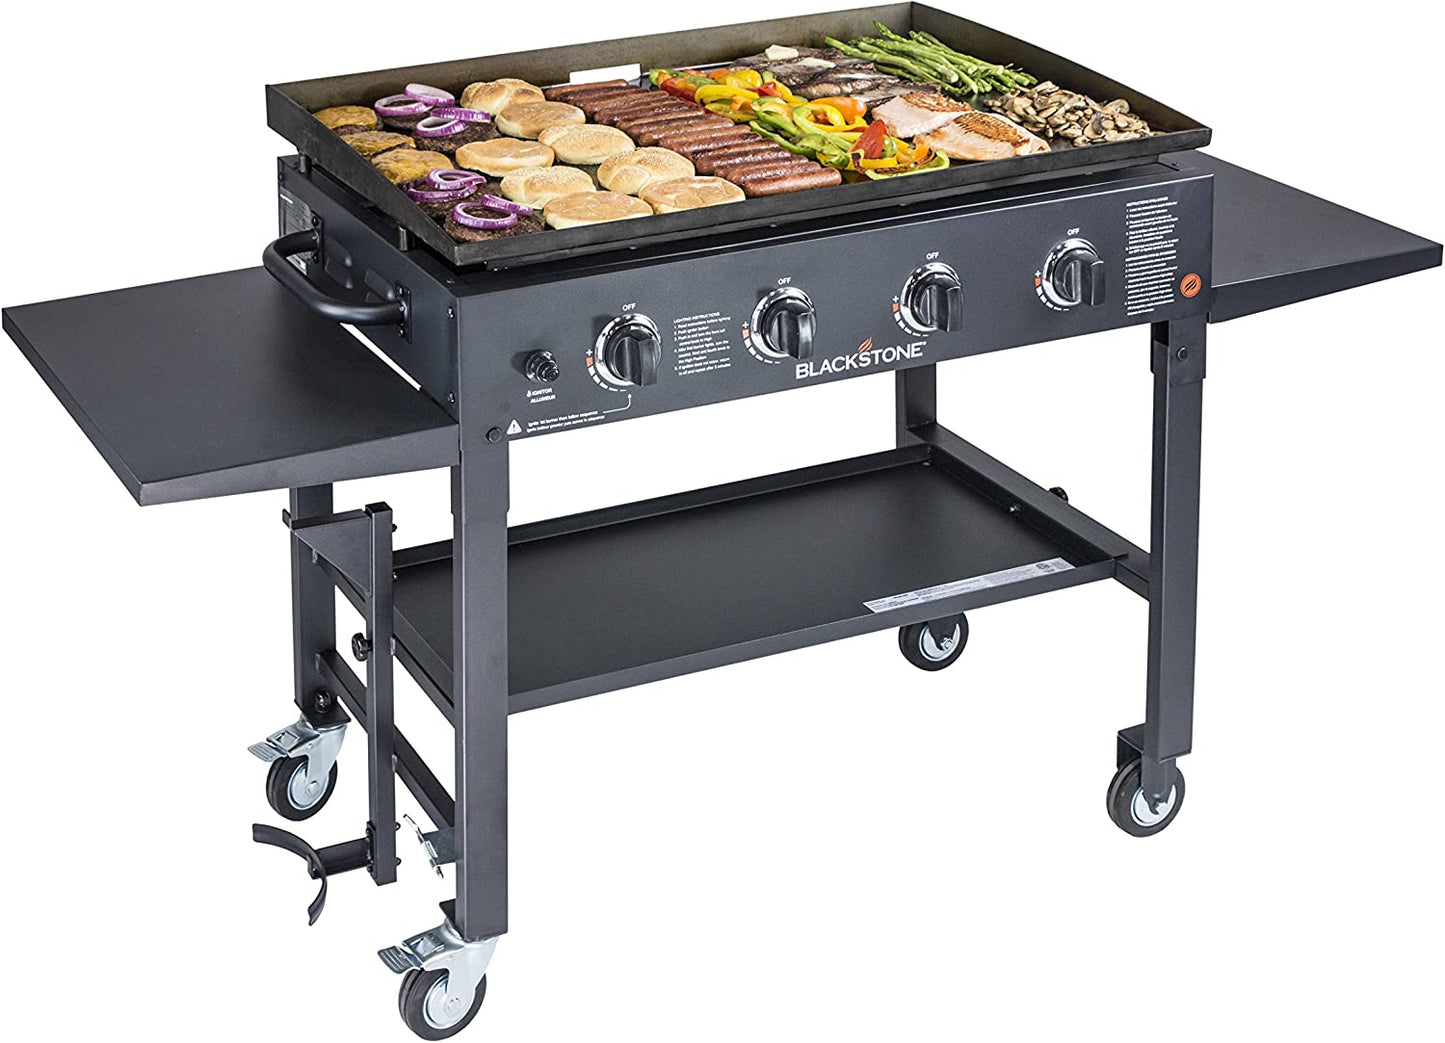 Buy 1554 Blackstone 36" Gas Griddle Cooking Station with Side Shelf